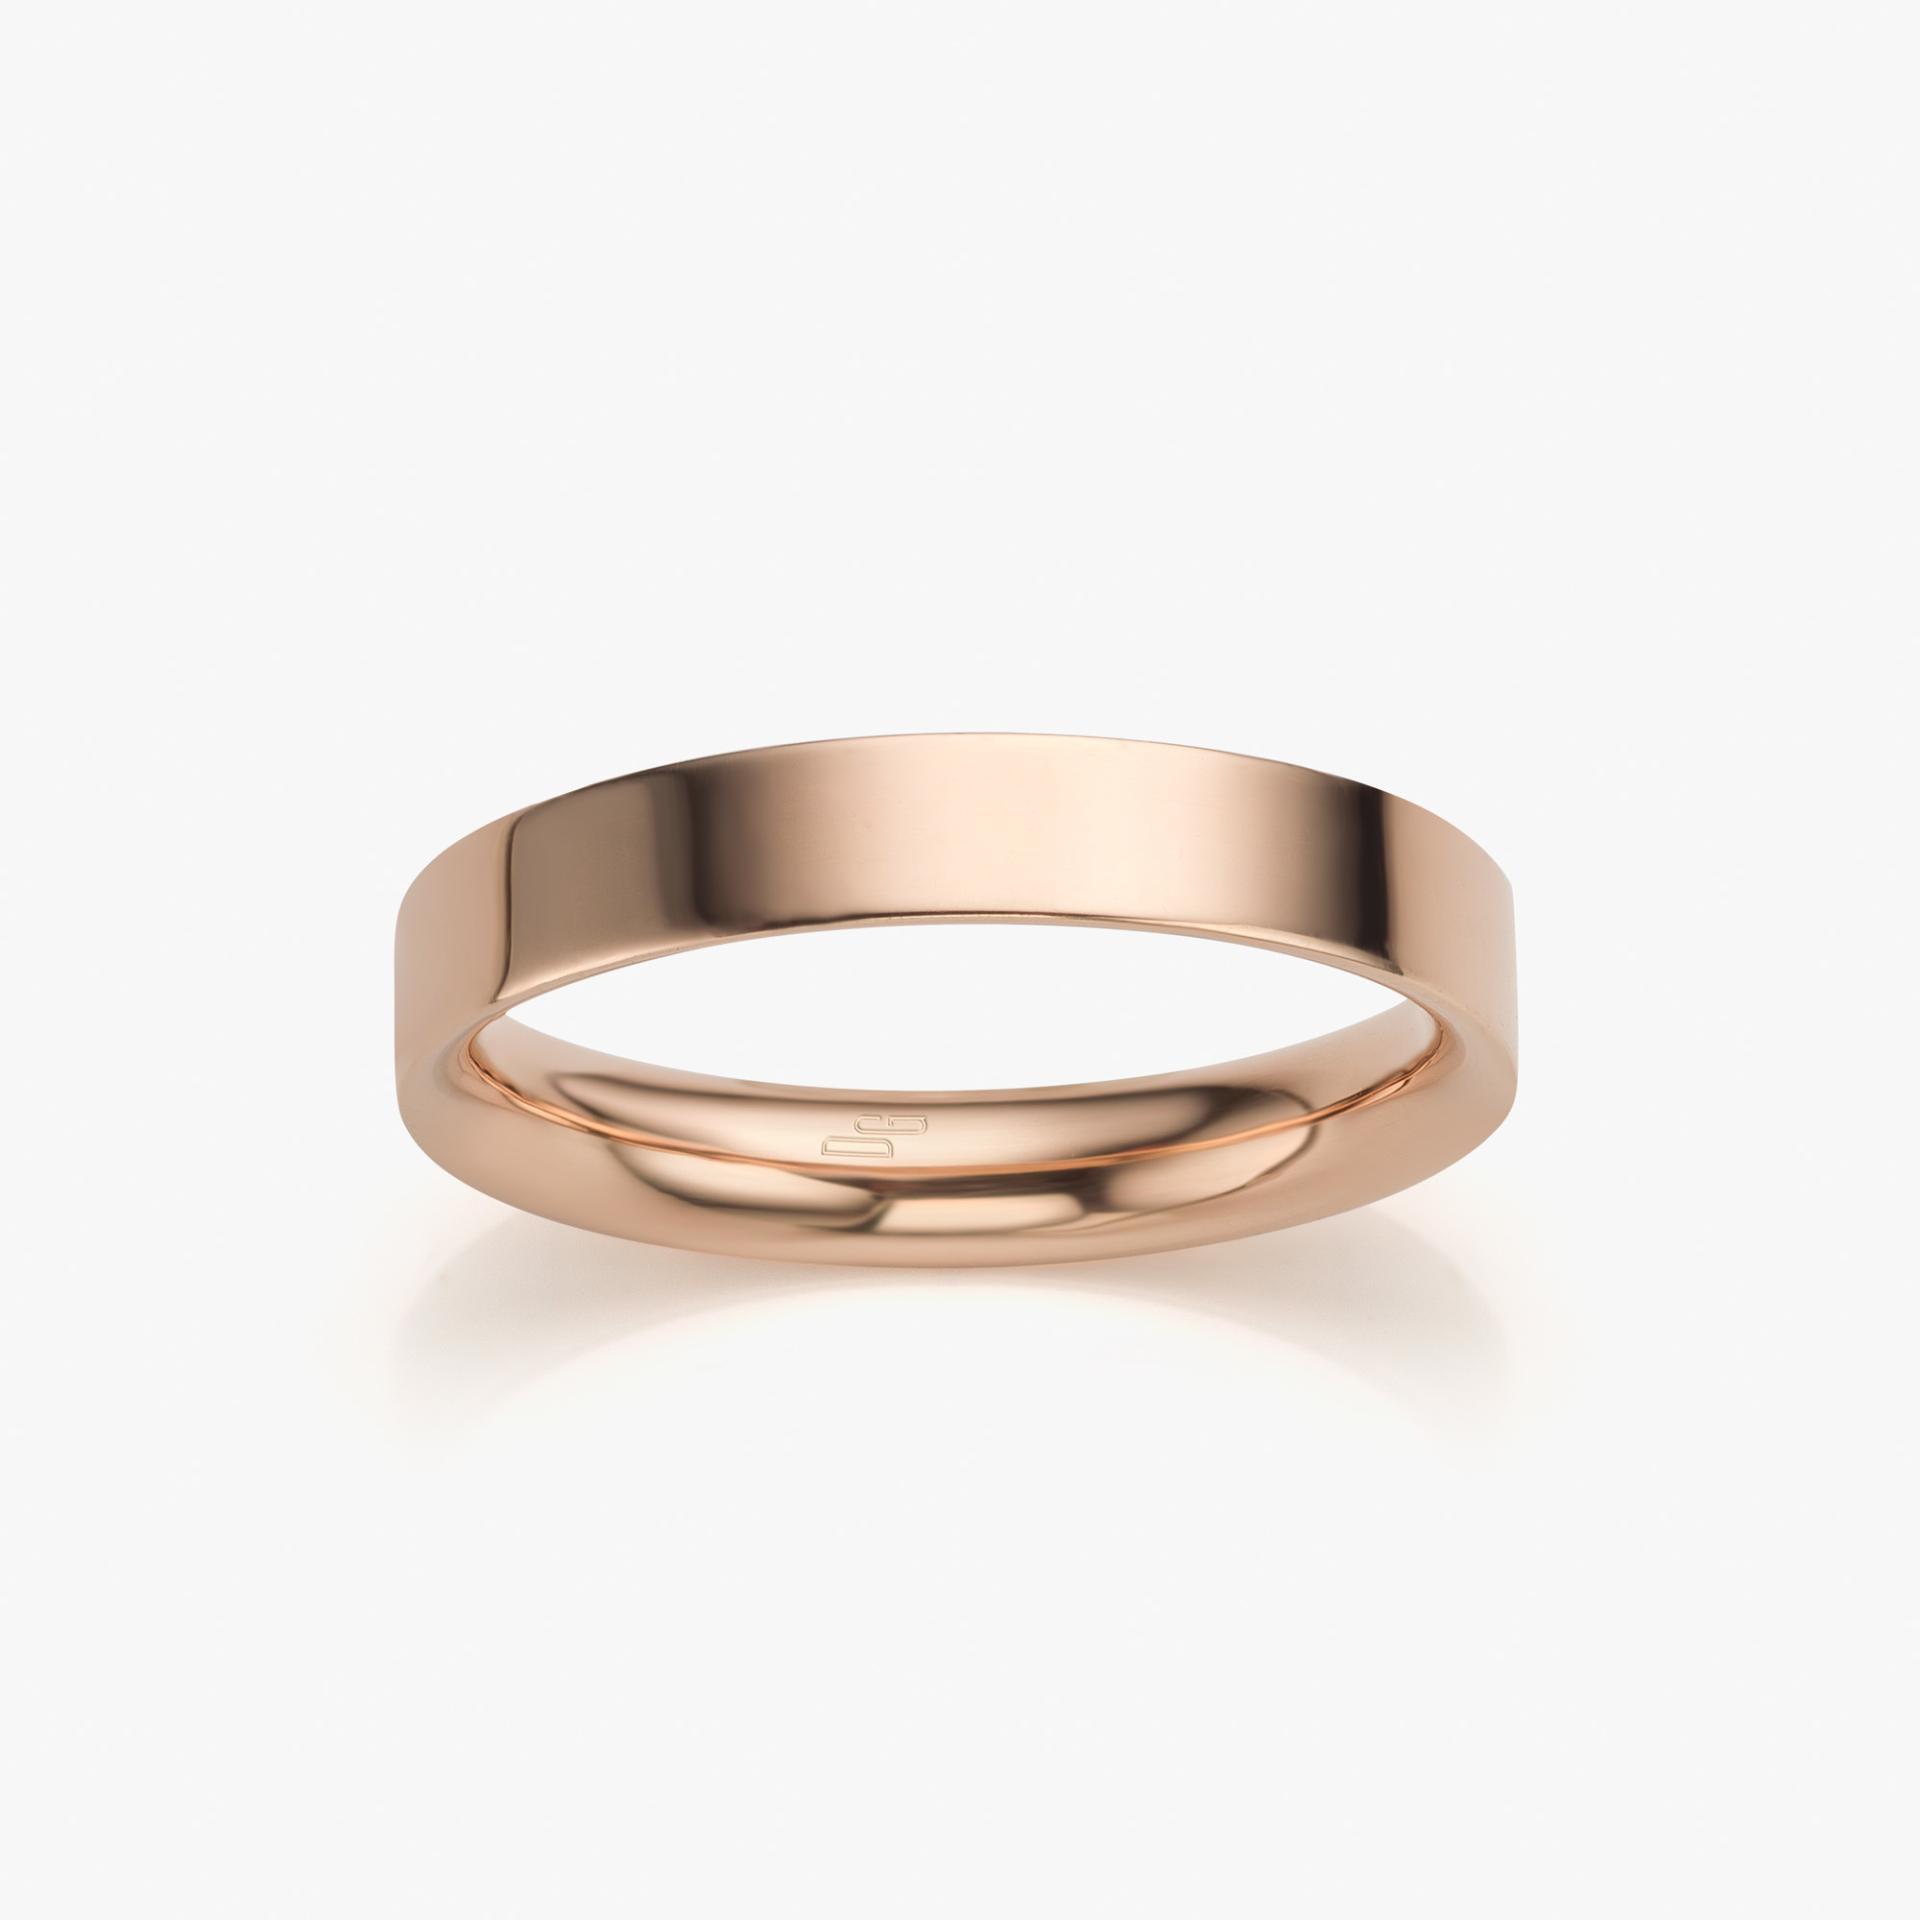 Wedding ring Epure model made by Maison De Greef